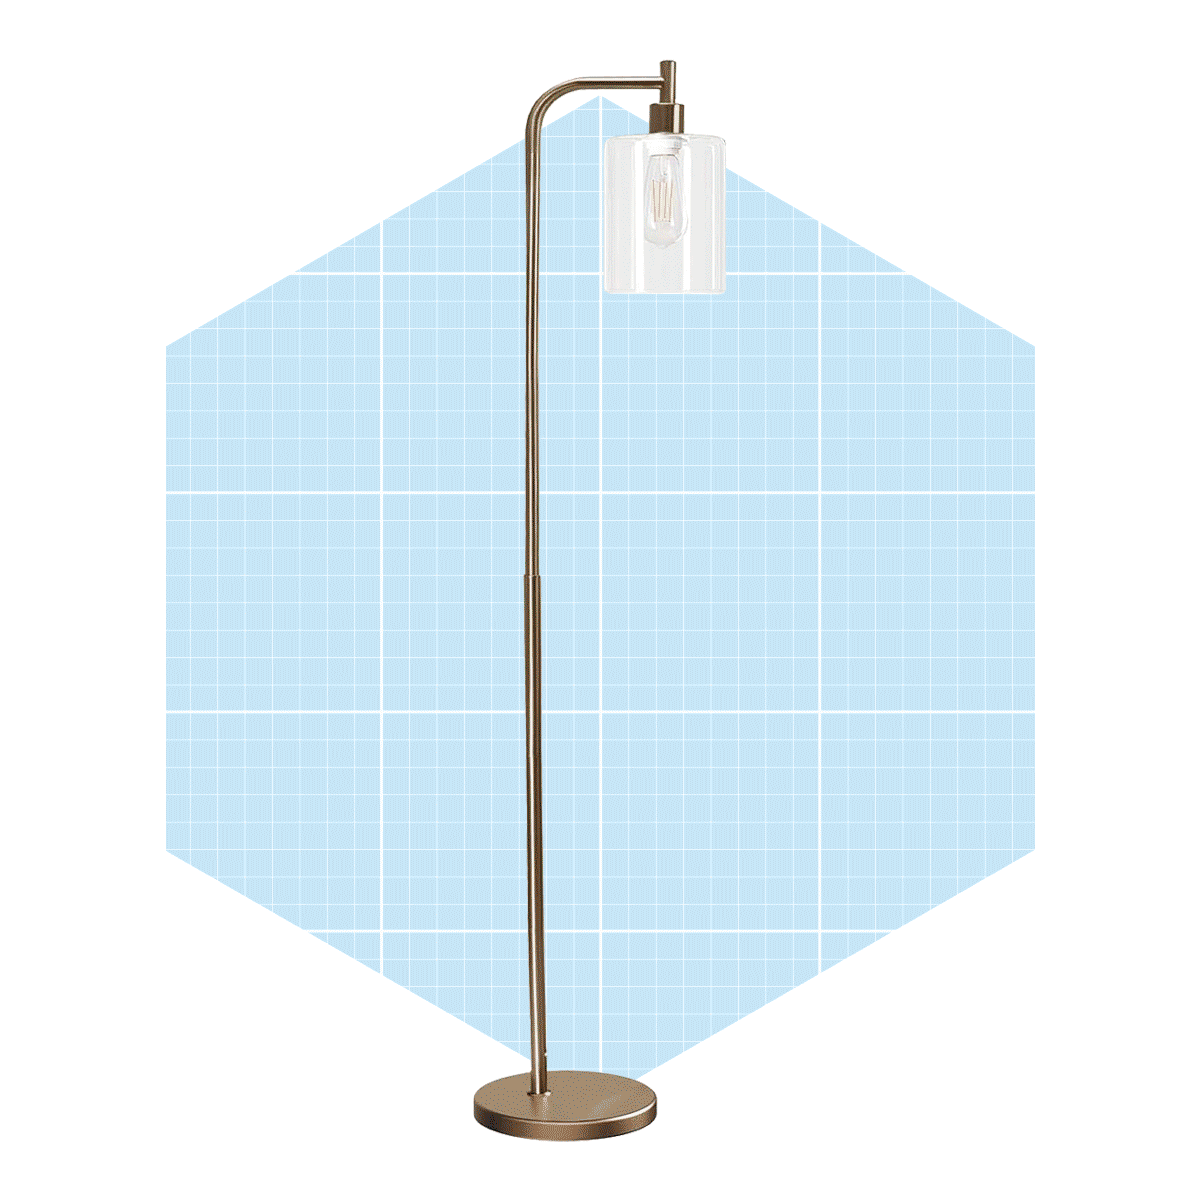 The 8 Best Floor Lamps to Illuminate Your Space